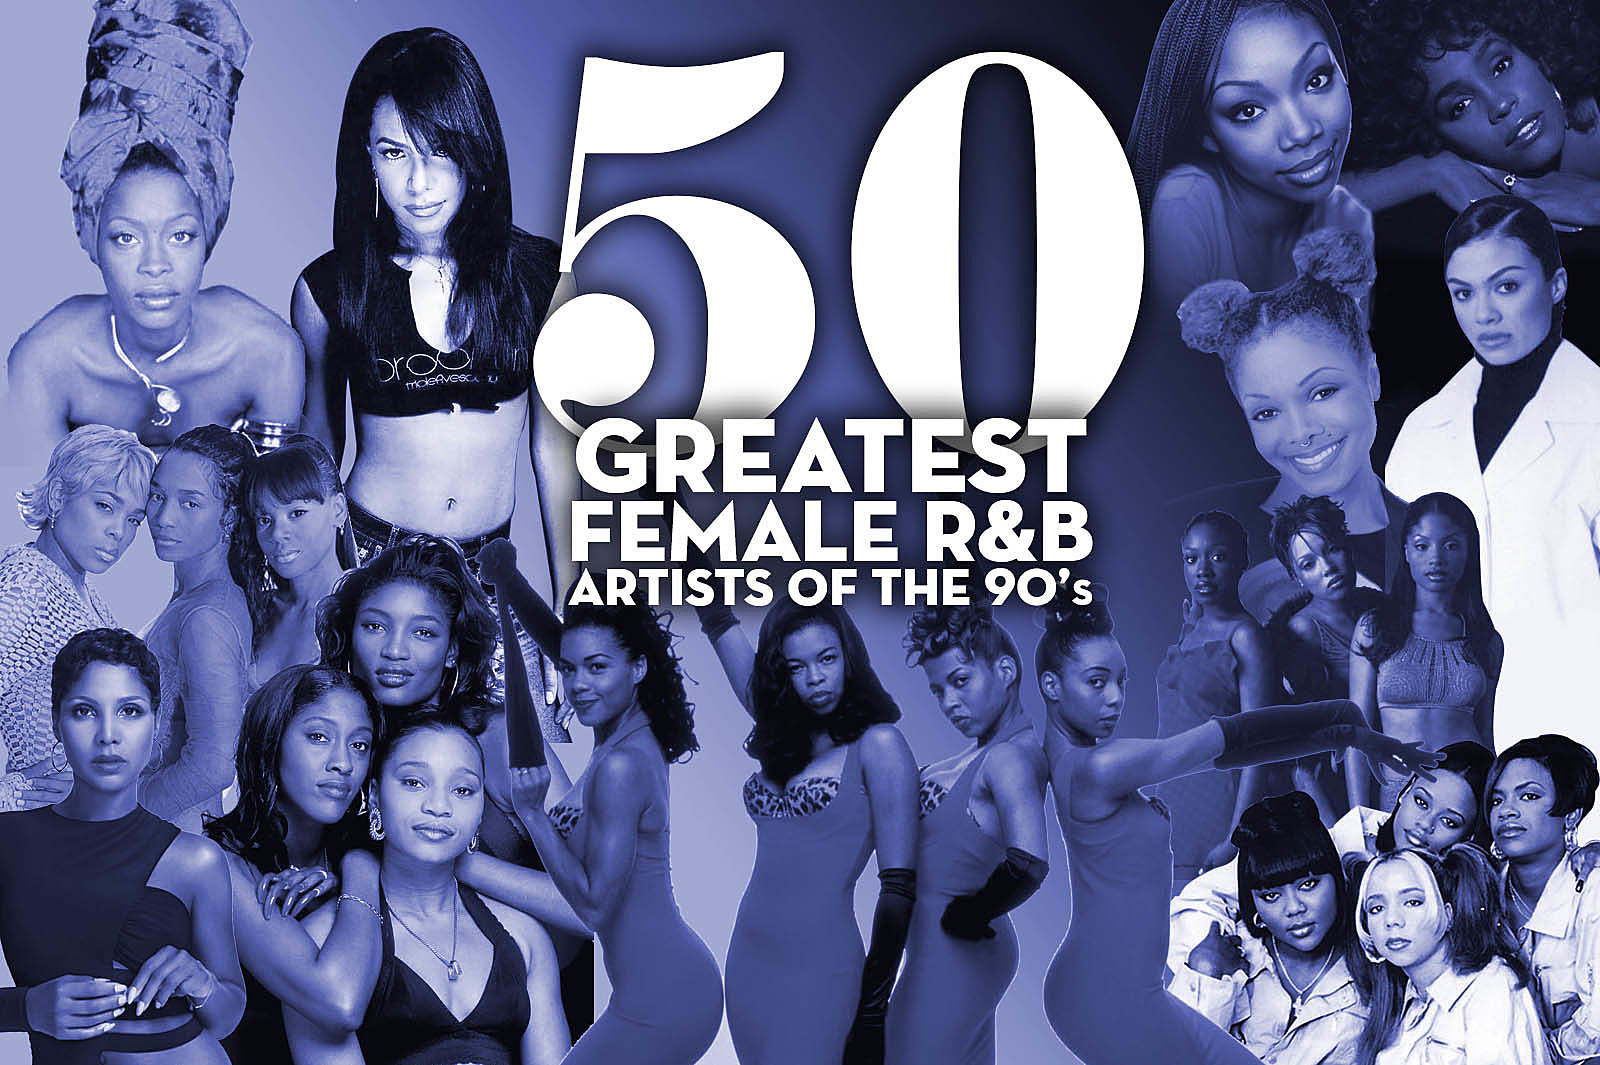 The 50 Greatest Female R&B Artists of the '90s